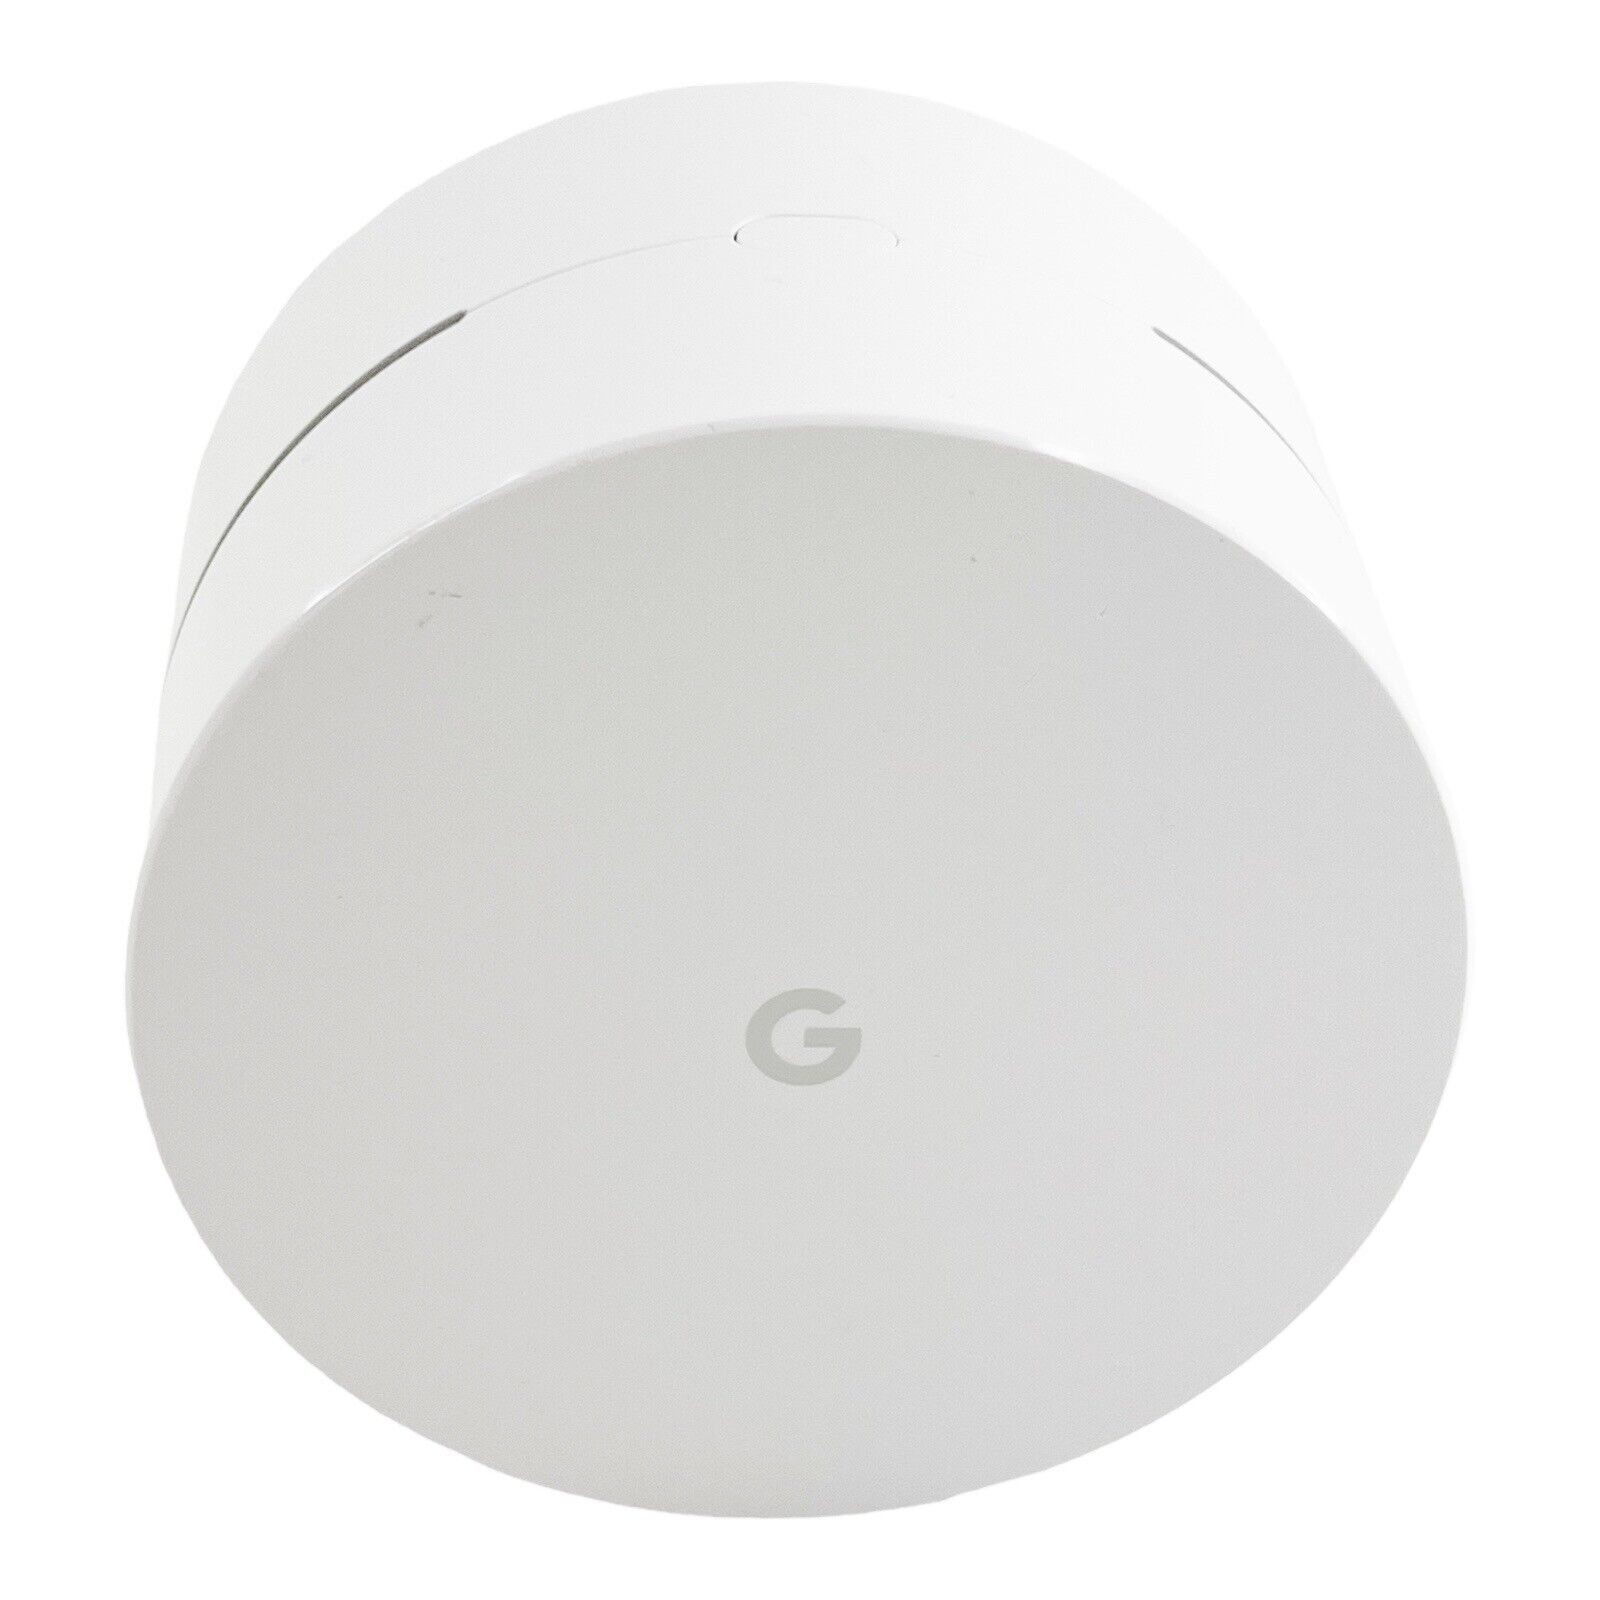 OEM White Google Wi-Fi Whole Home Wireless Router AC-1304 (NO POWER CORD)